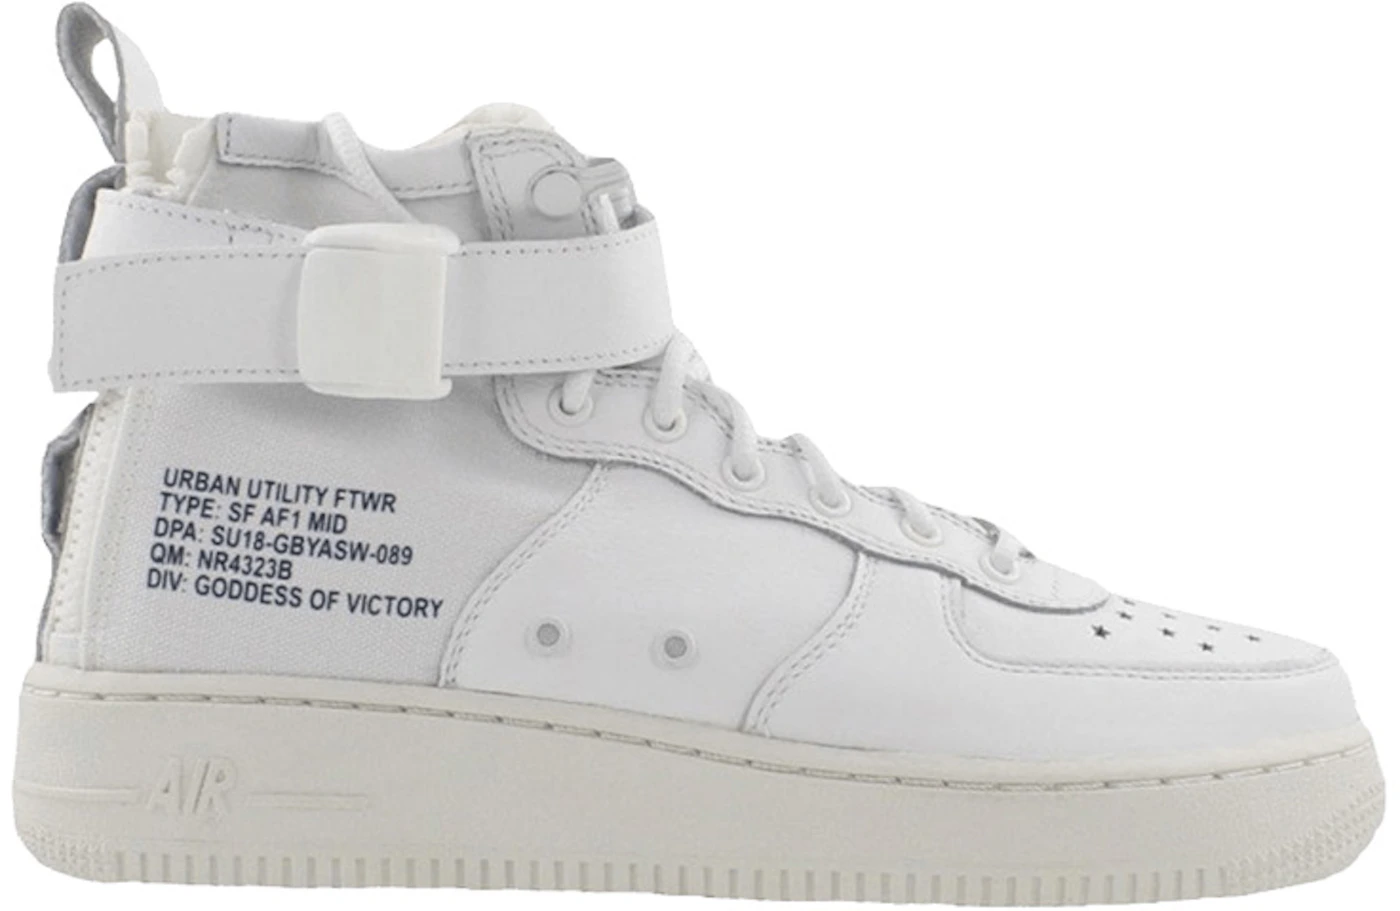 blad middag Een goede vriend Nike SF Air Force 1 Mid White (GS) - AR0690-100 - US